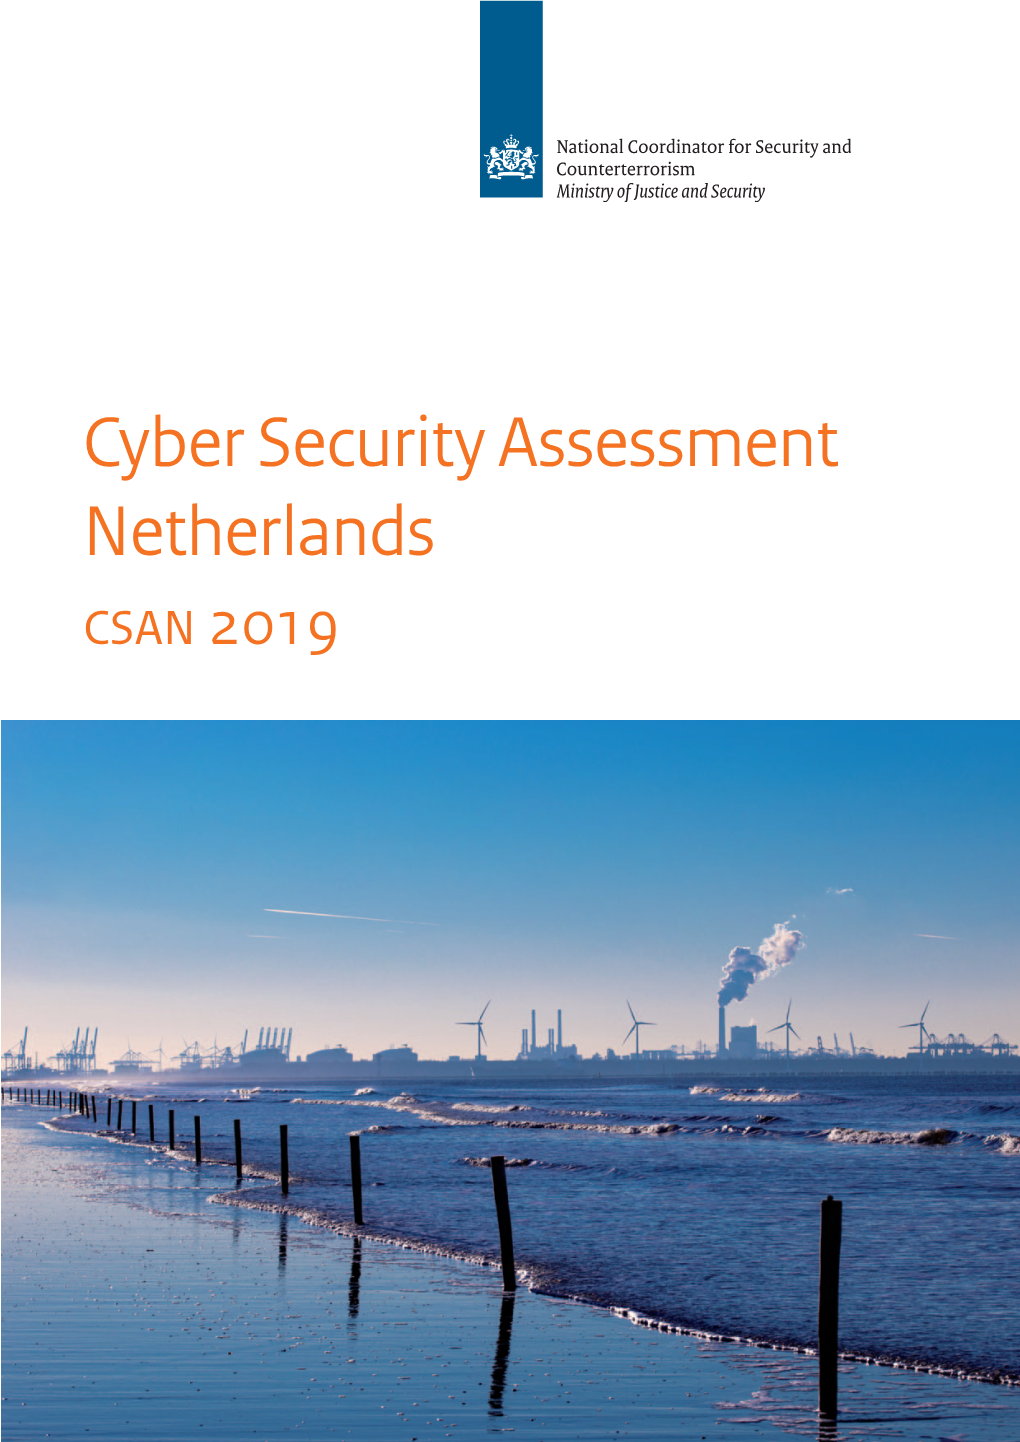 Cyber Security Assessment Netherlands 2019